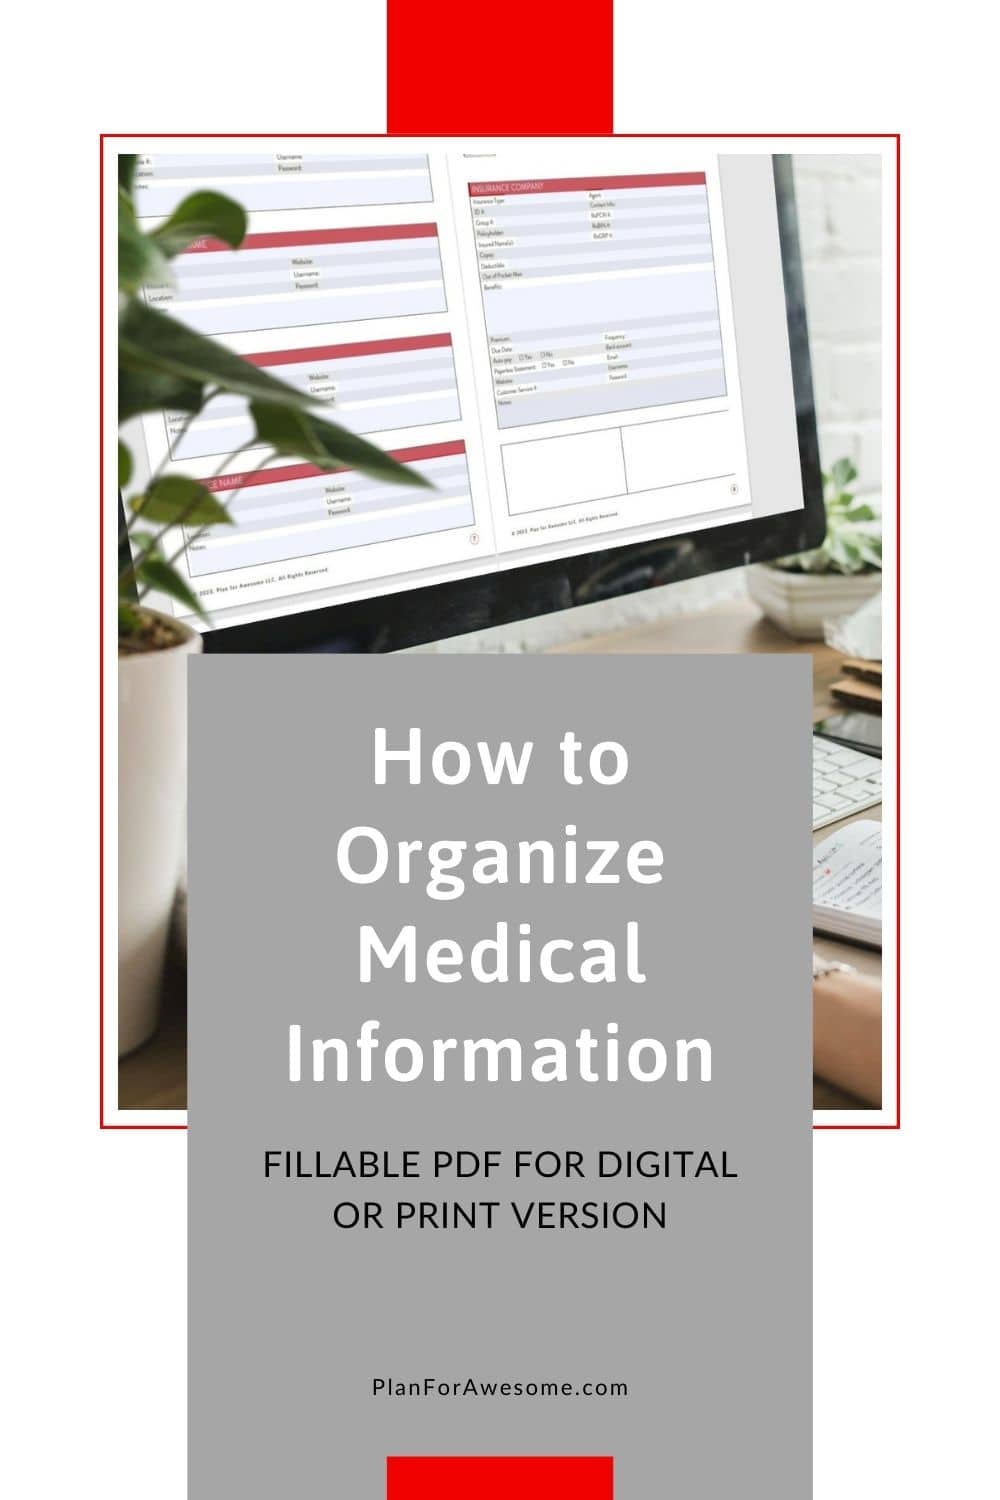 How to Organize Your Medical Information